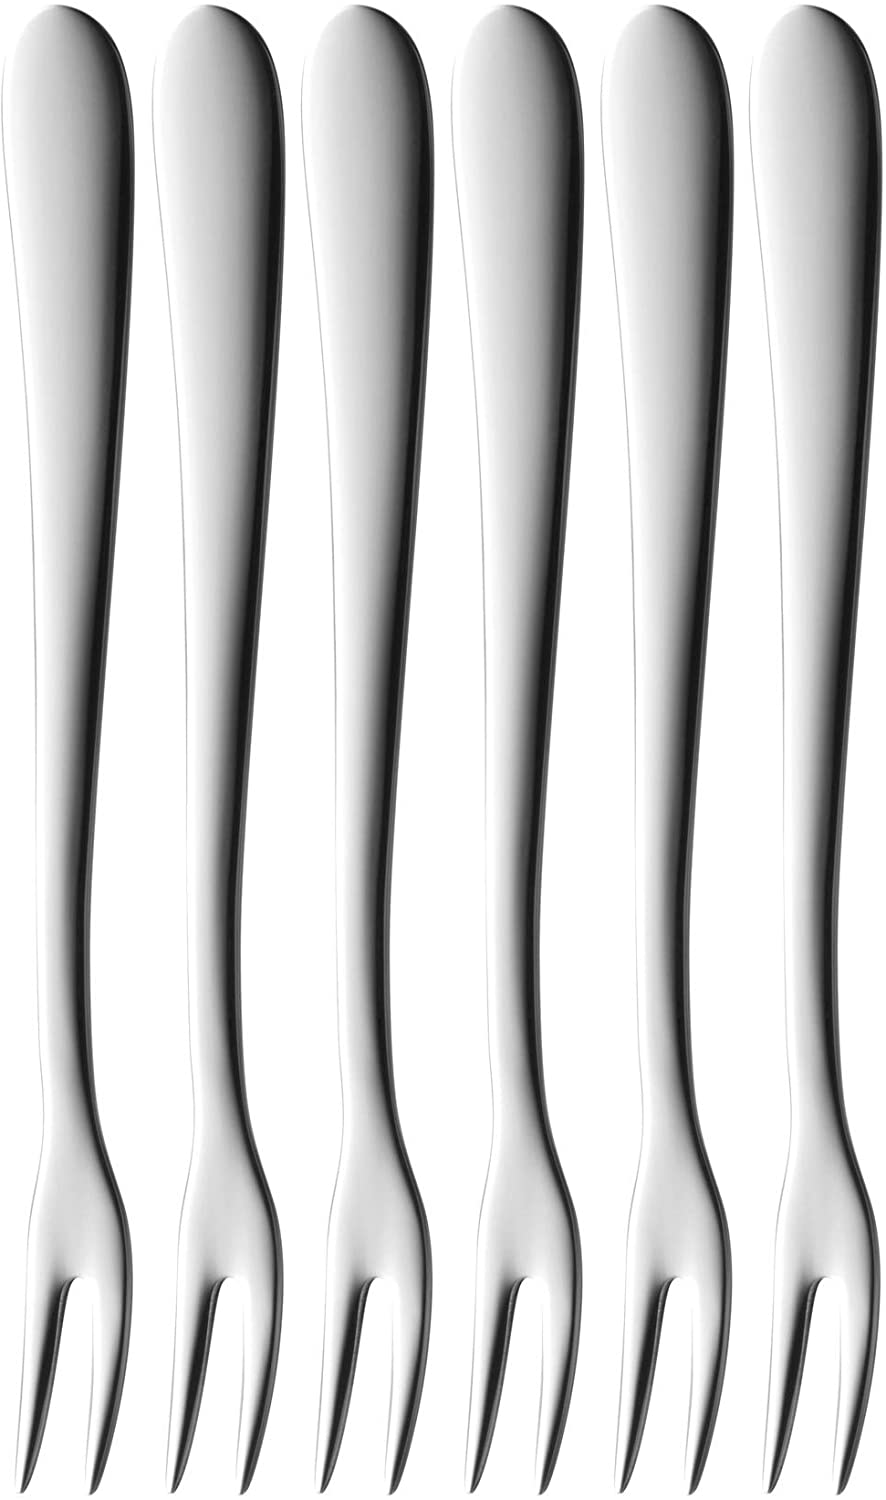 Silit Punch Fork 6 Pieces Midi Crominox Stainless Steel 18/10 POLISHED STAINLESS STEEL